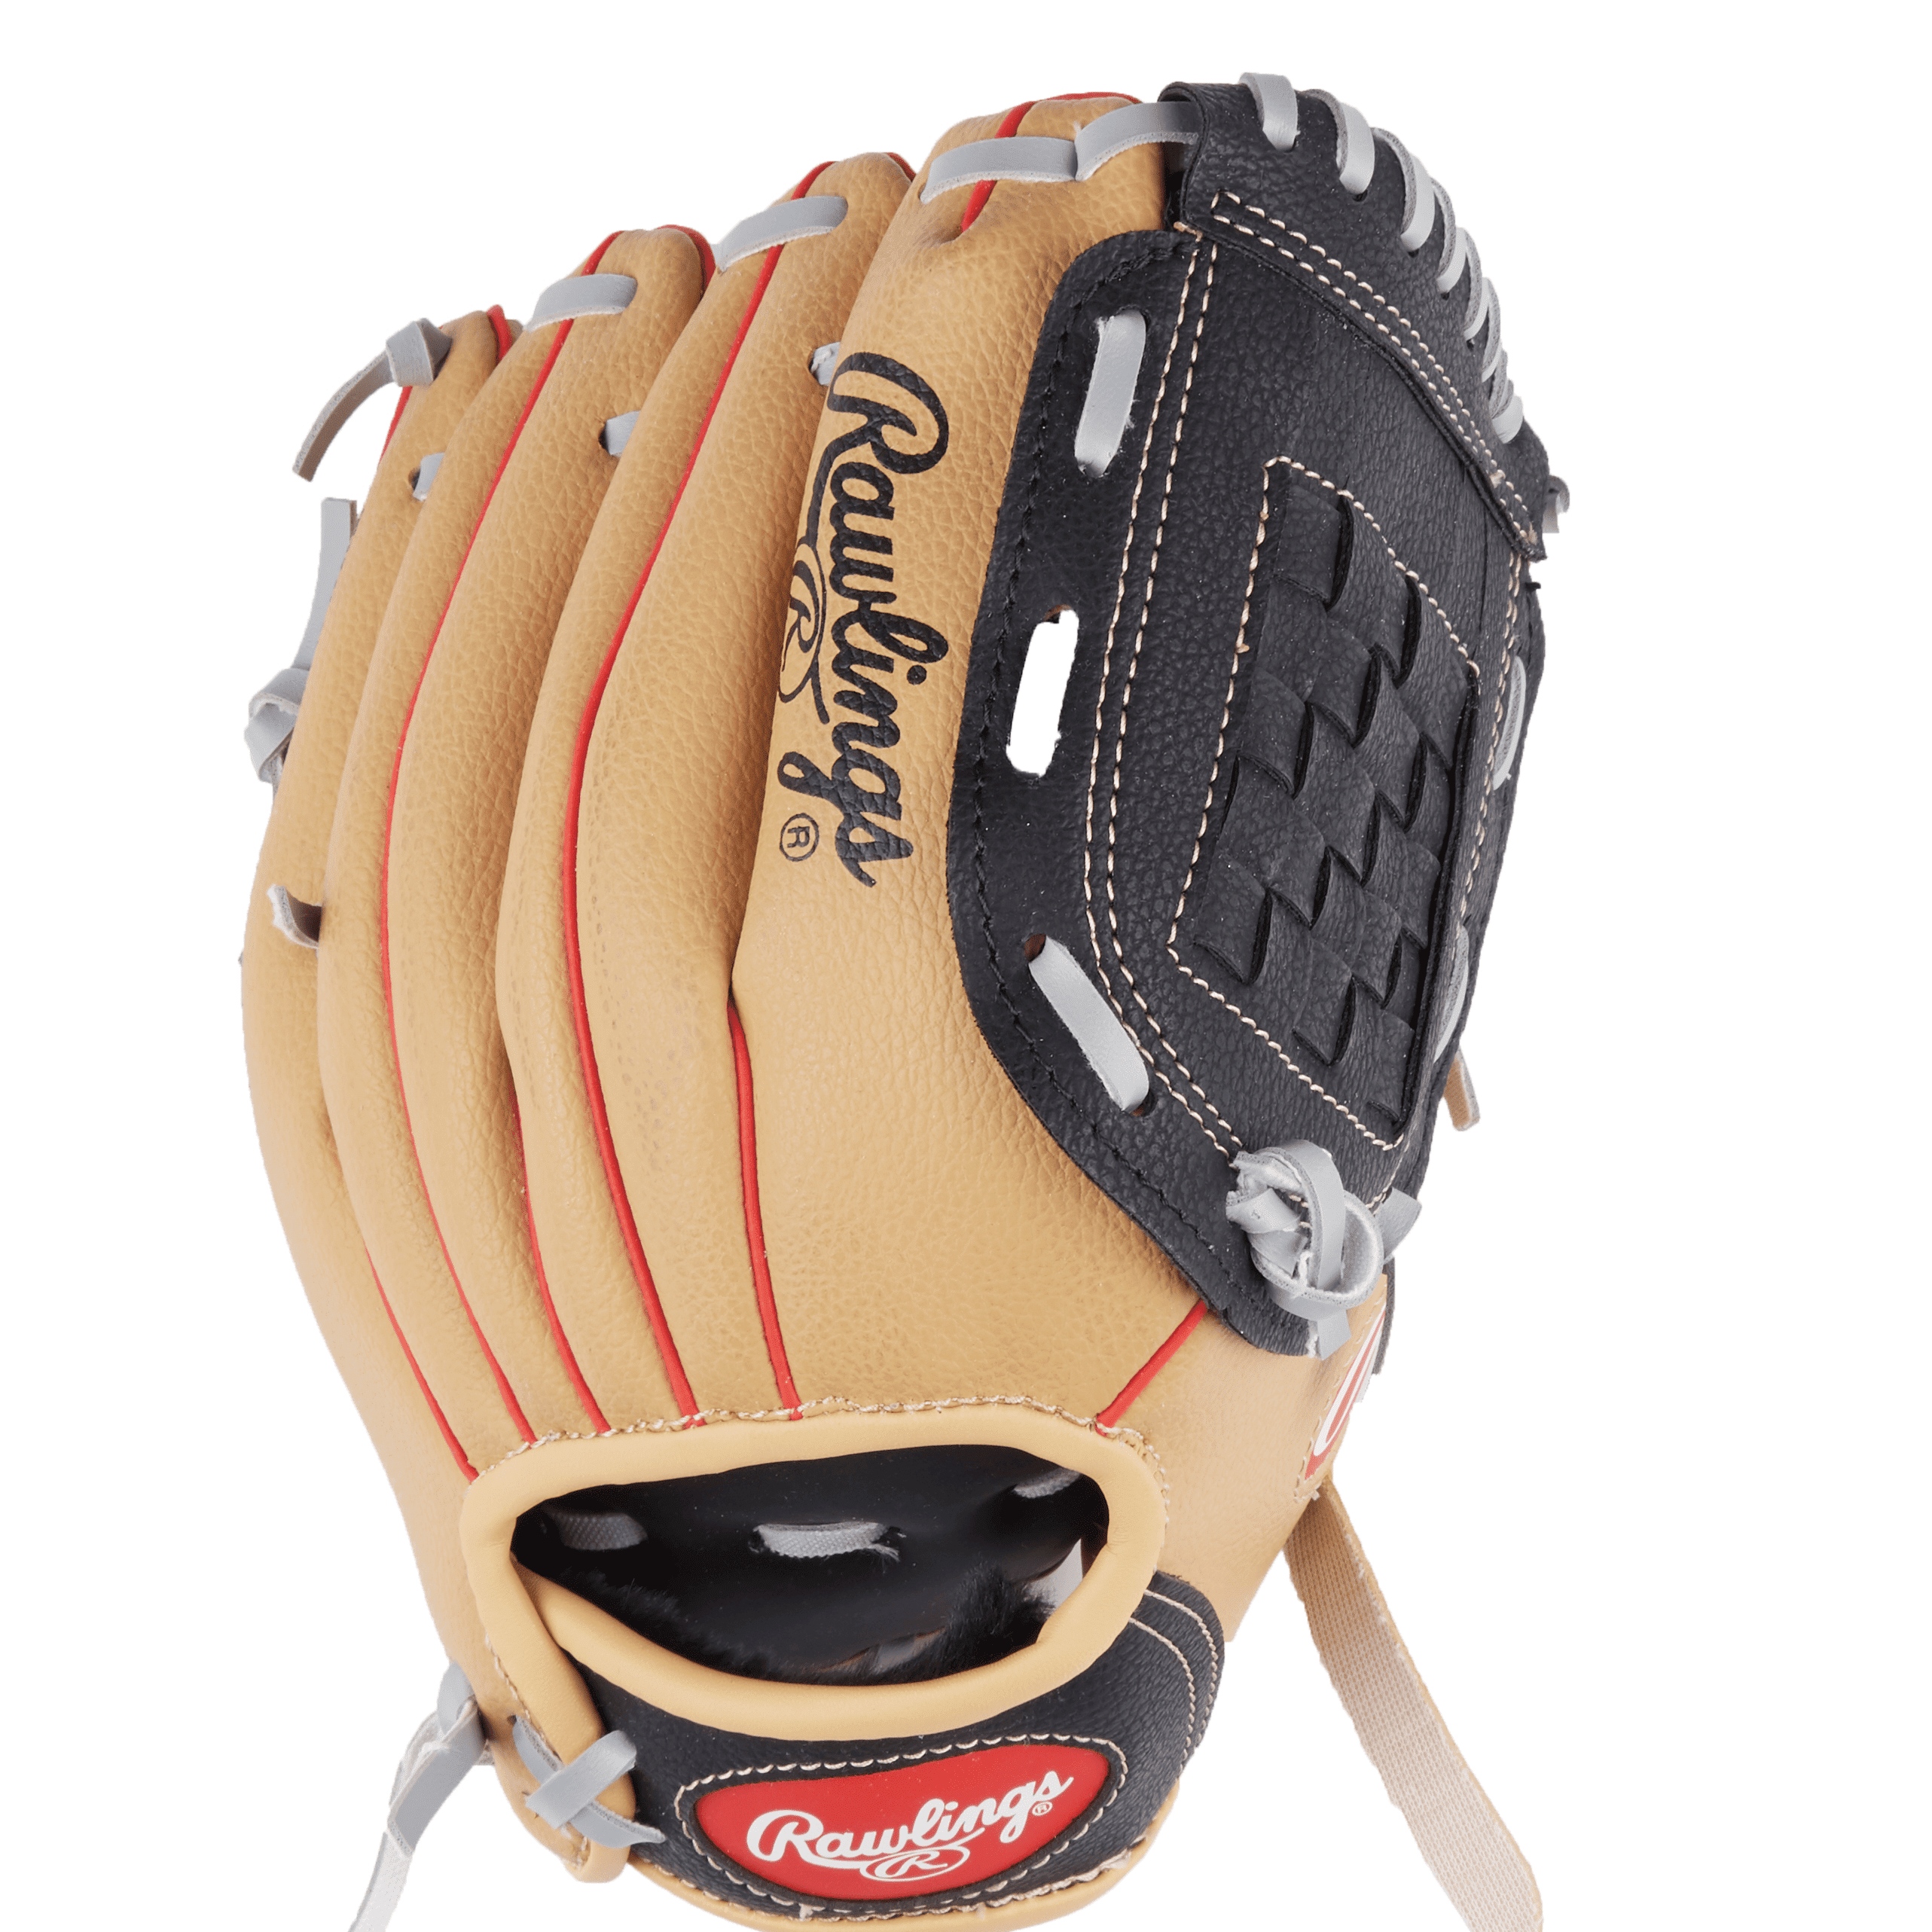 Rawlings Tee Ball Lefty Players Series Glove 10 Inch Youth Pl10ss for sale online 